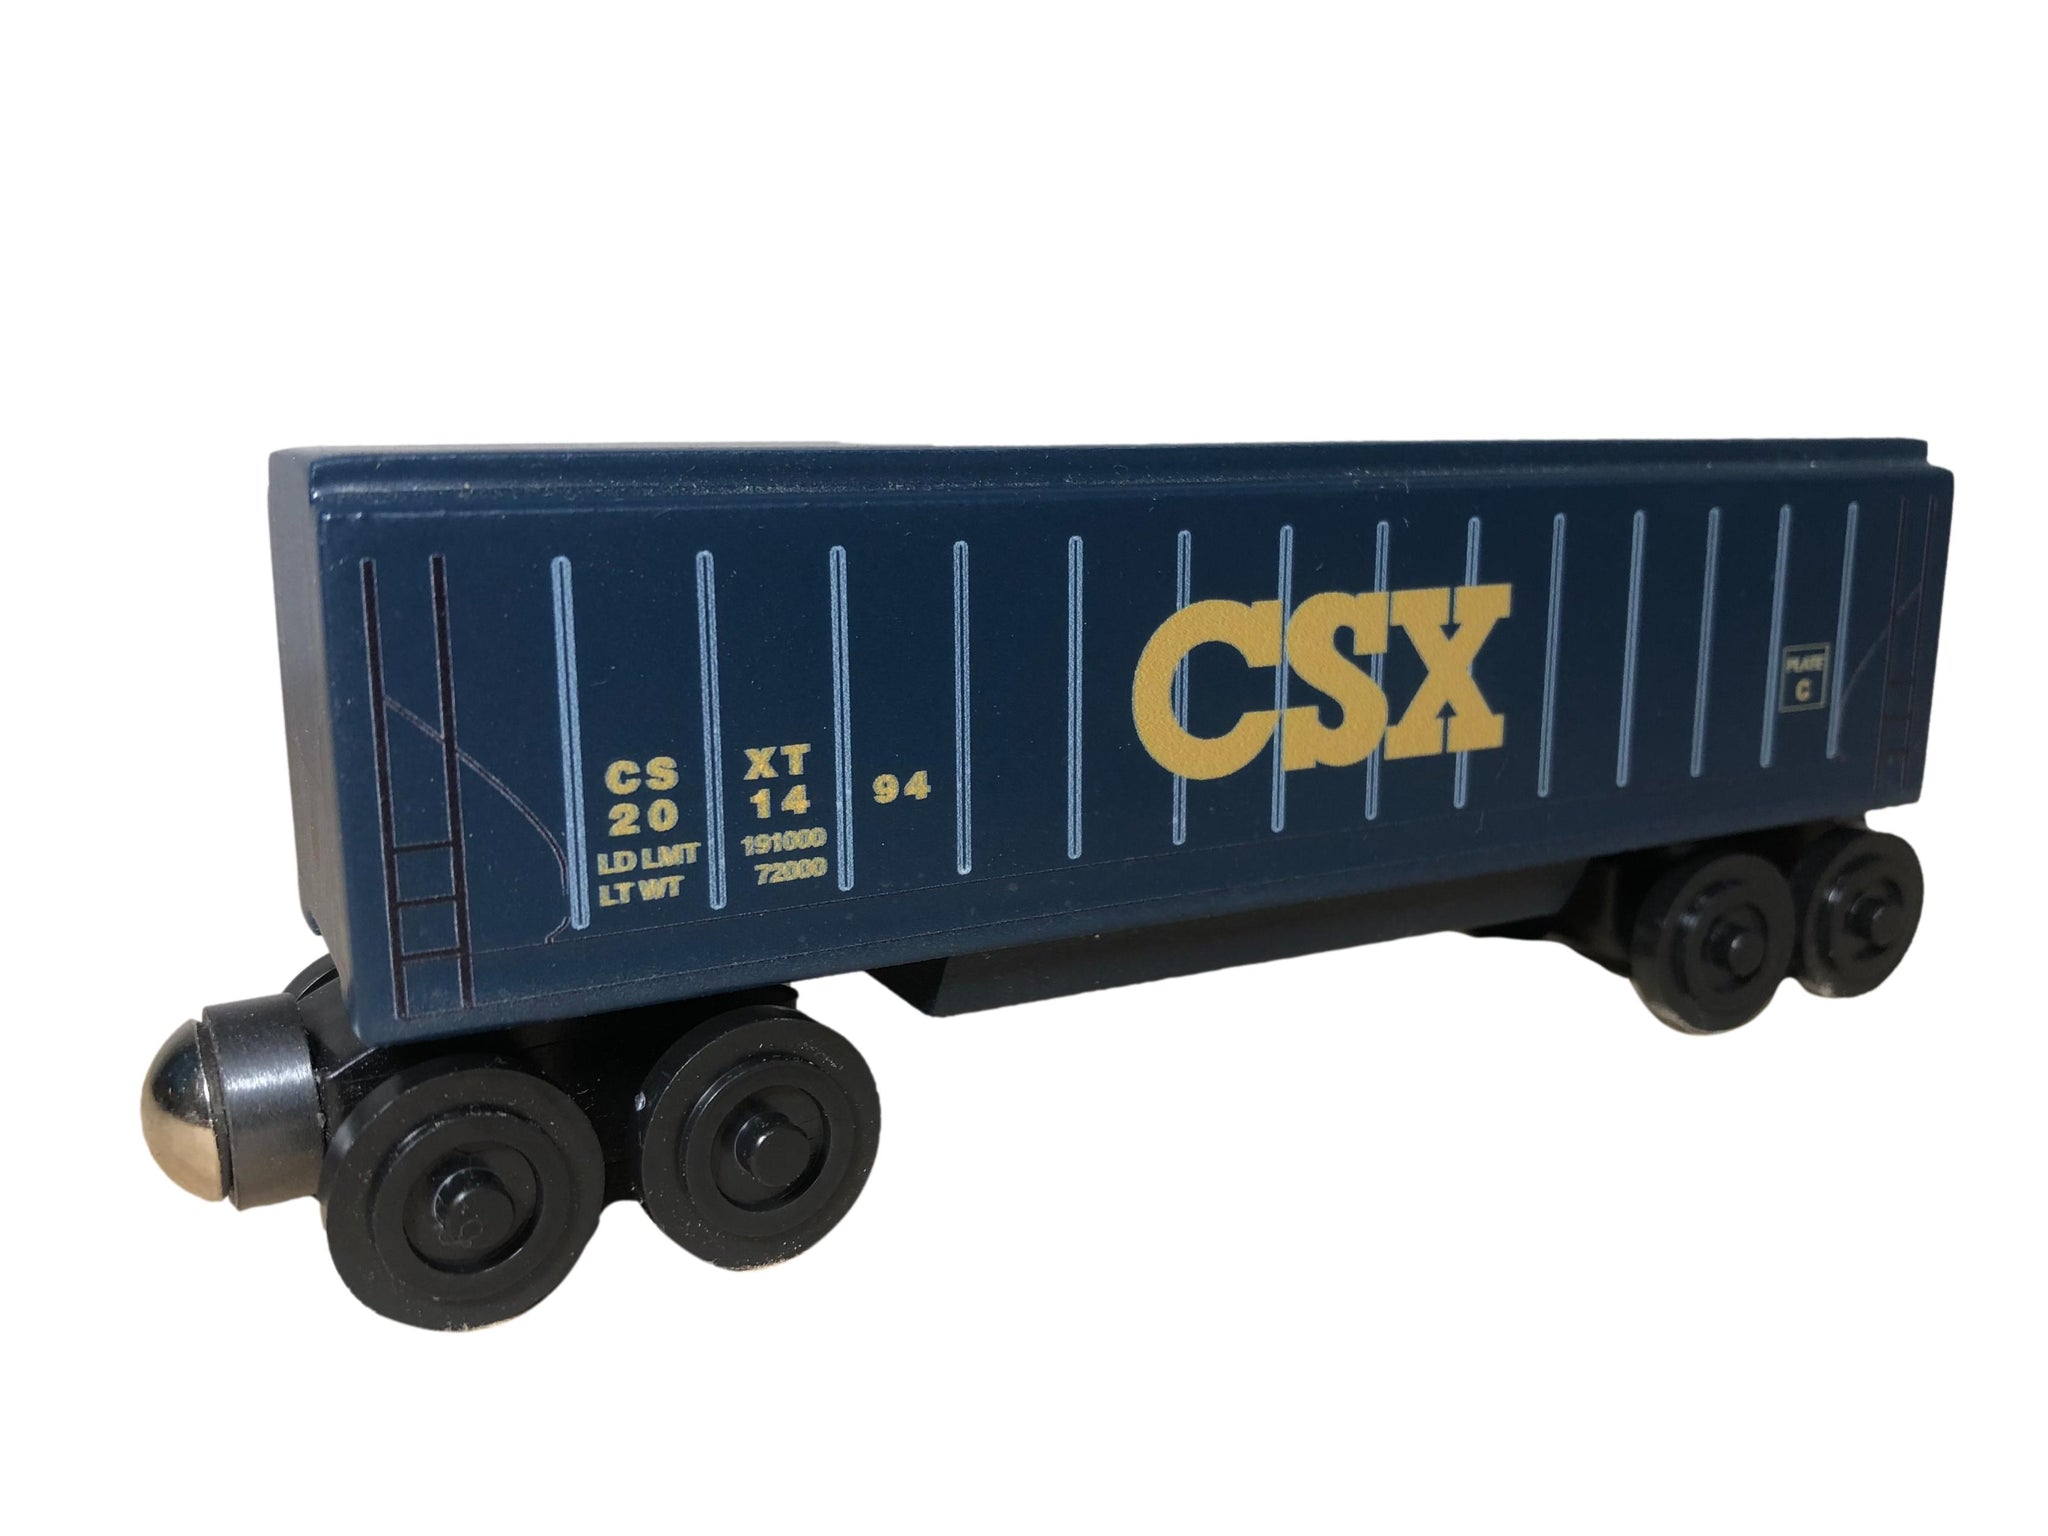 CSX Covered Hopper 2022 Wooden Toy Train